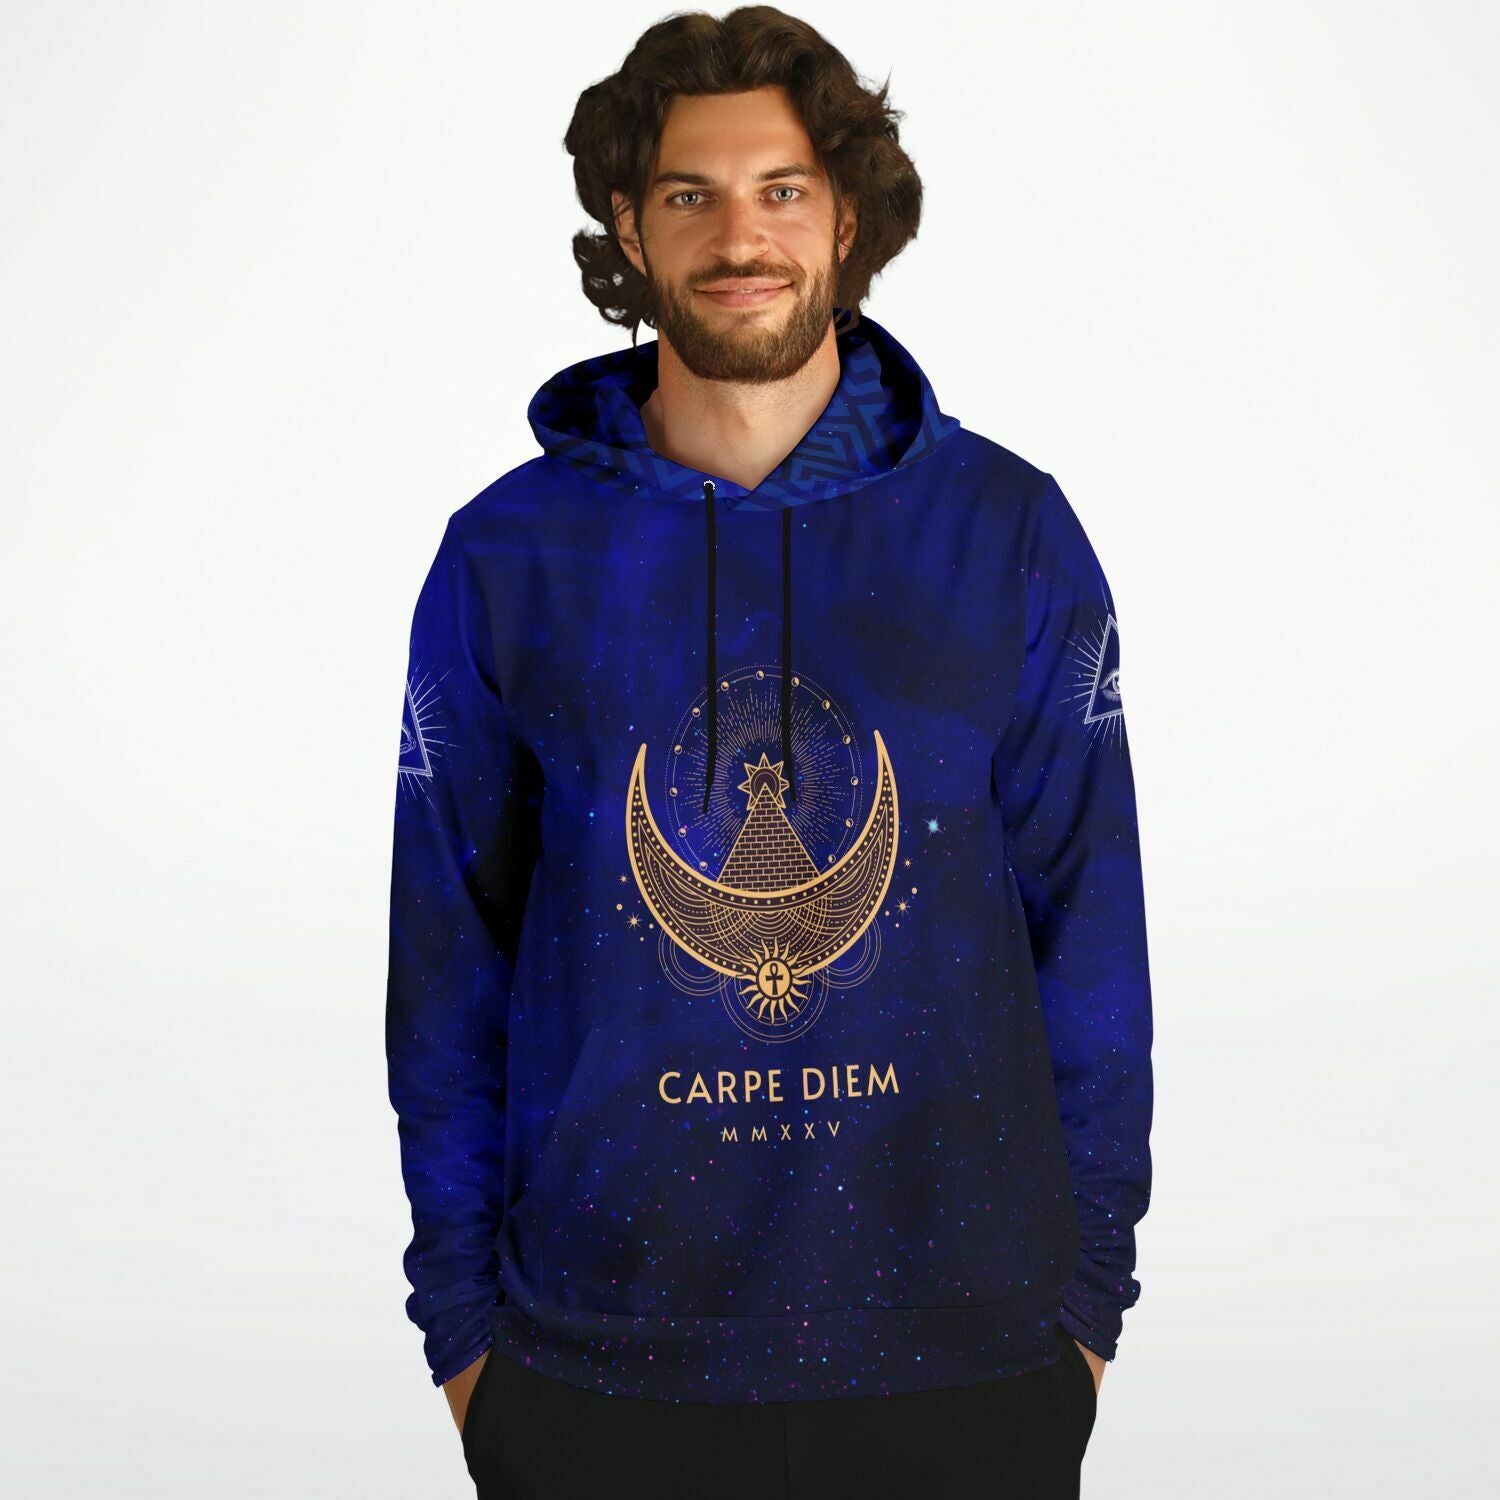 Elivior's fashionable hoodie features a crescent moon alongside the Eye of Providence, incorporating Illuminati and Masonic symbols, making it a popular choice among celebrity streetwear enthusiasts